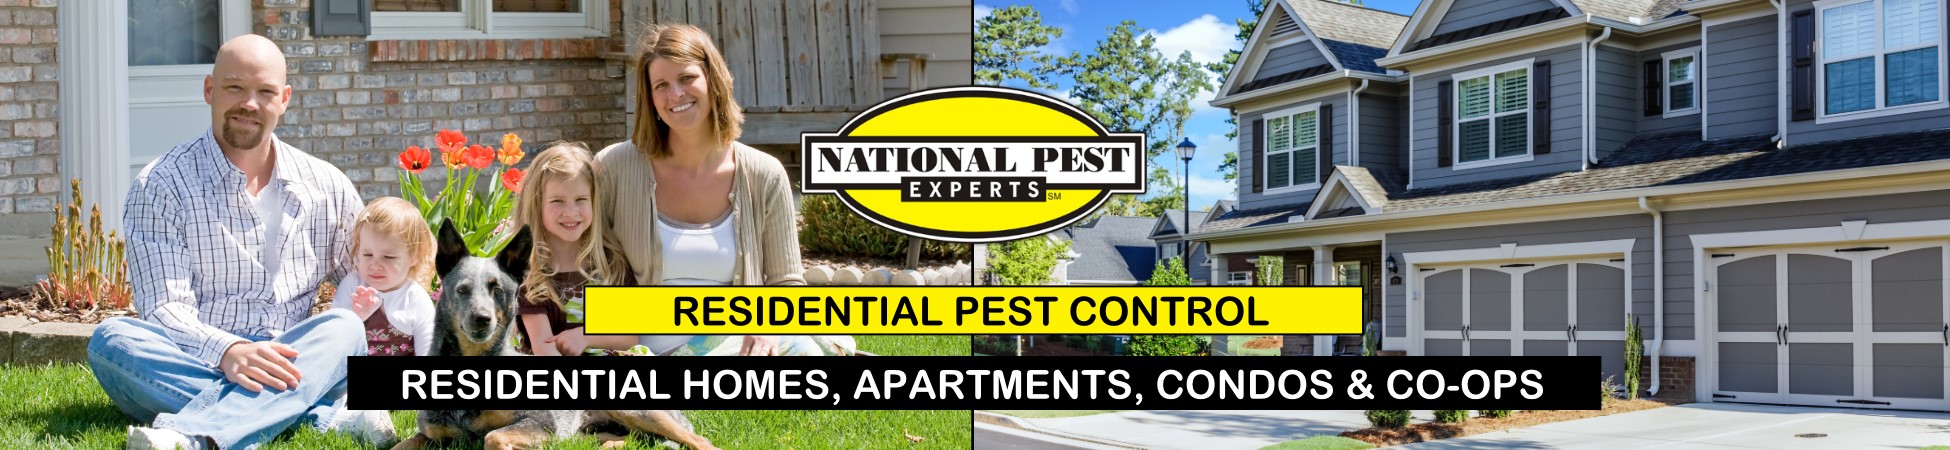 National Pest Experts - Residential exterminating and pest control in Eatons Neck, NY